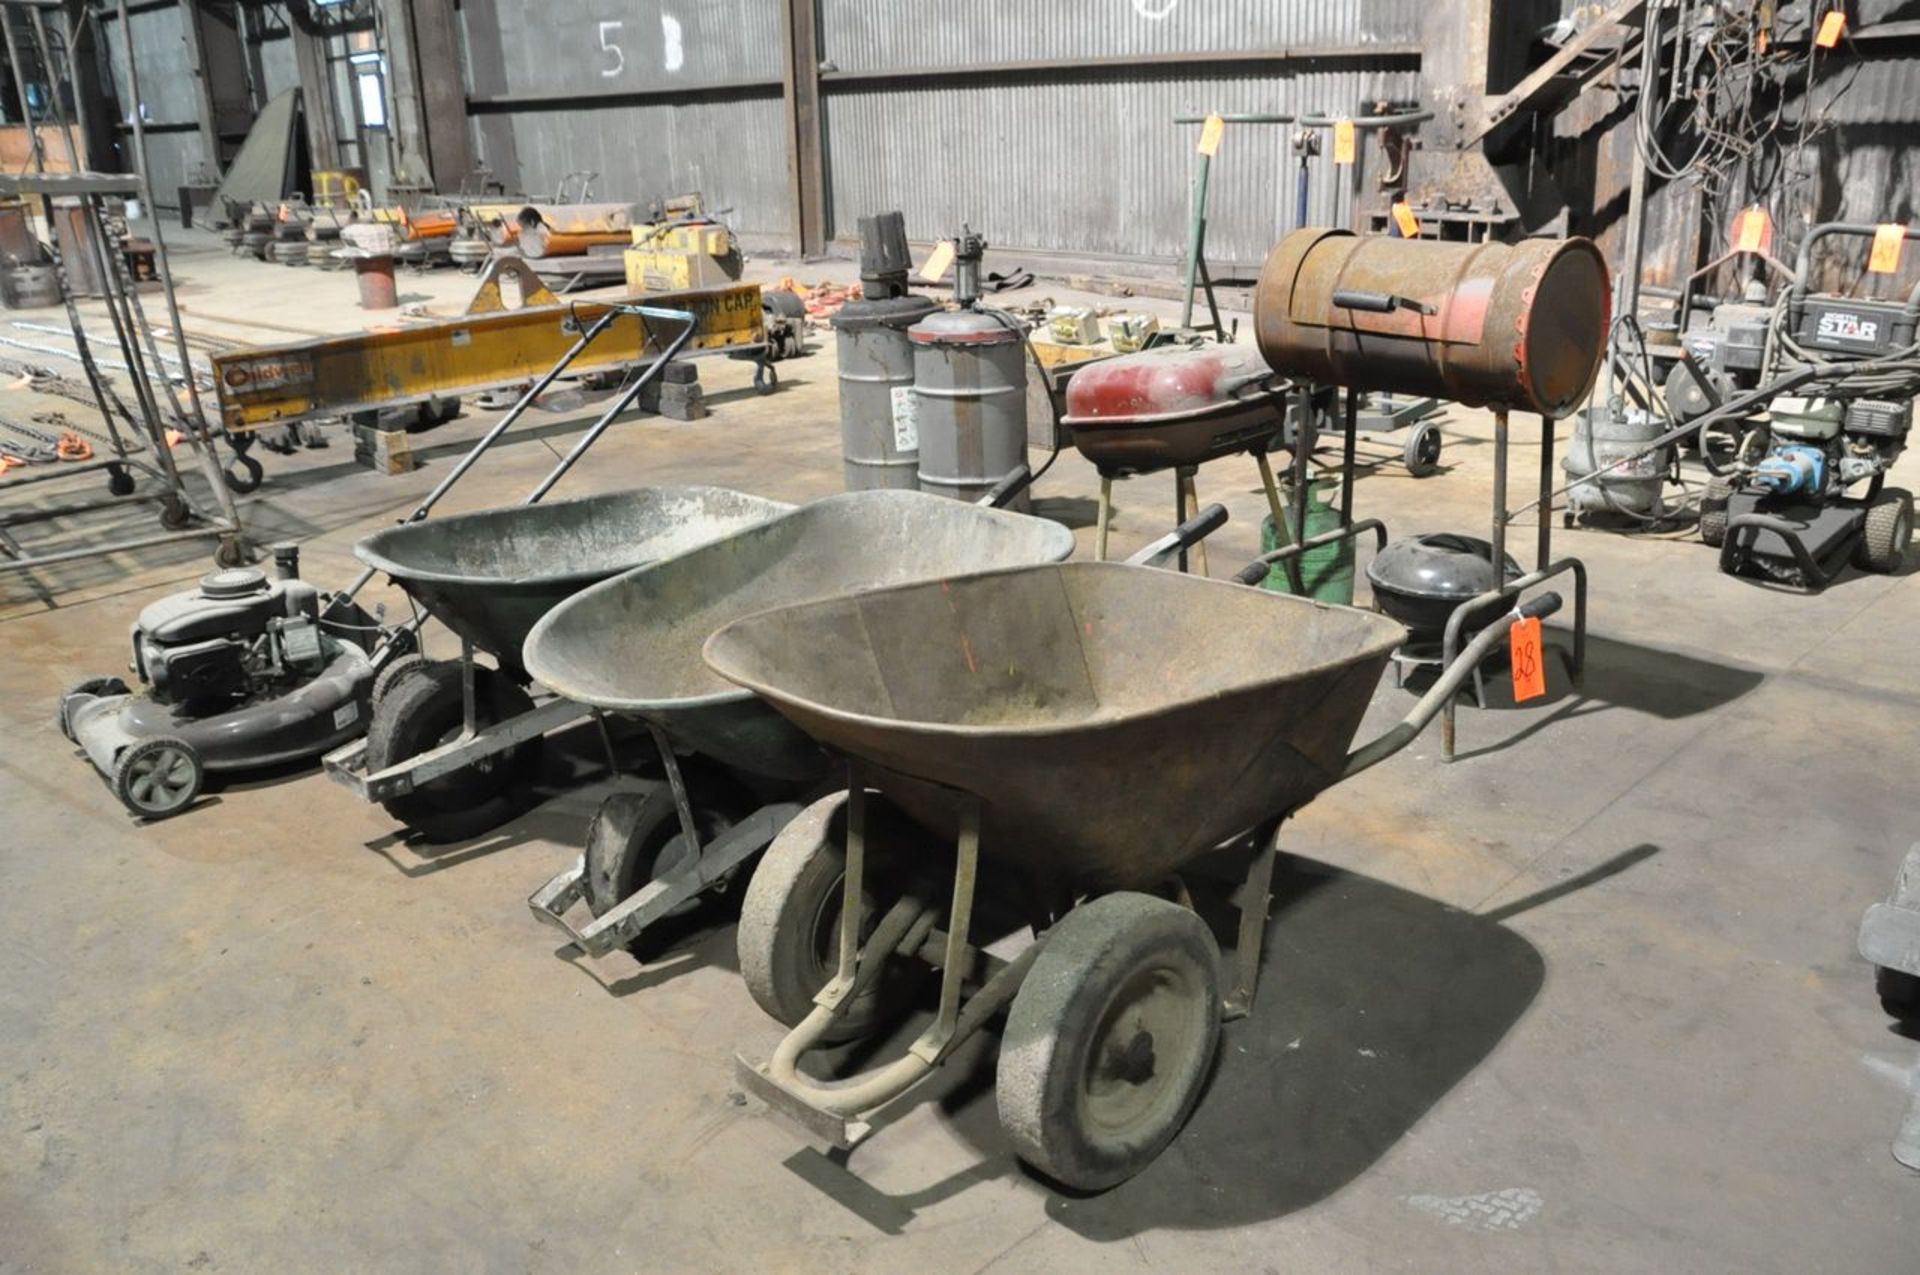 Lot - (3) Wheelbarrows, (1) Lawn Mower and (3) Barbecues, (Mill Annex)